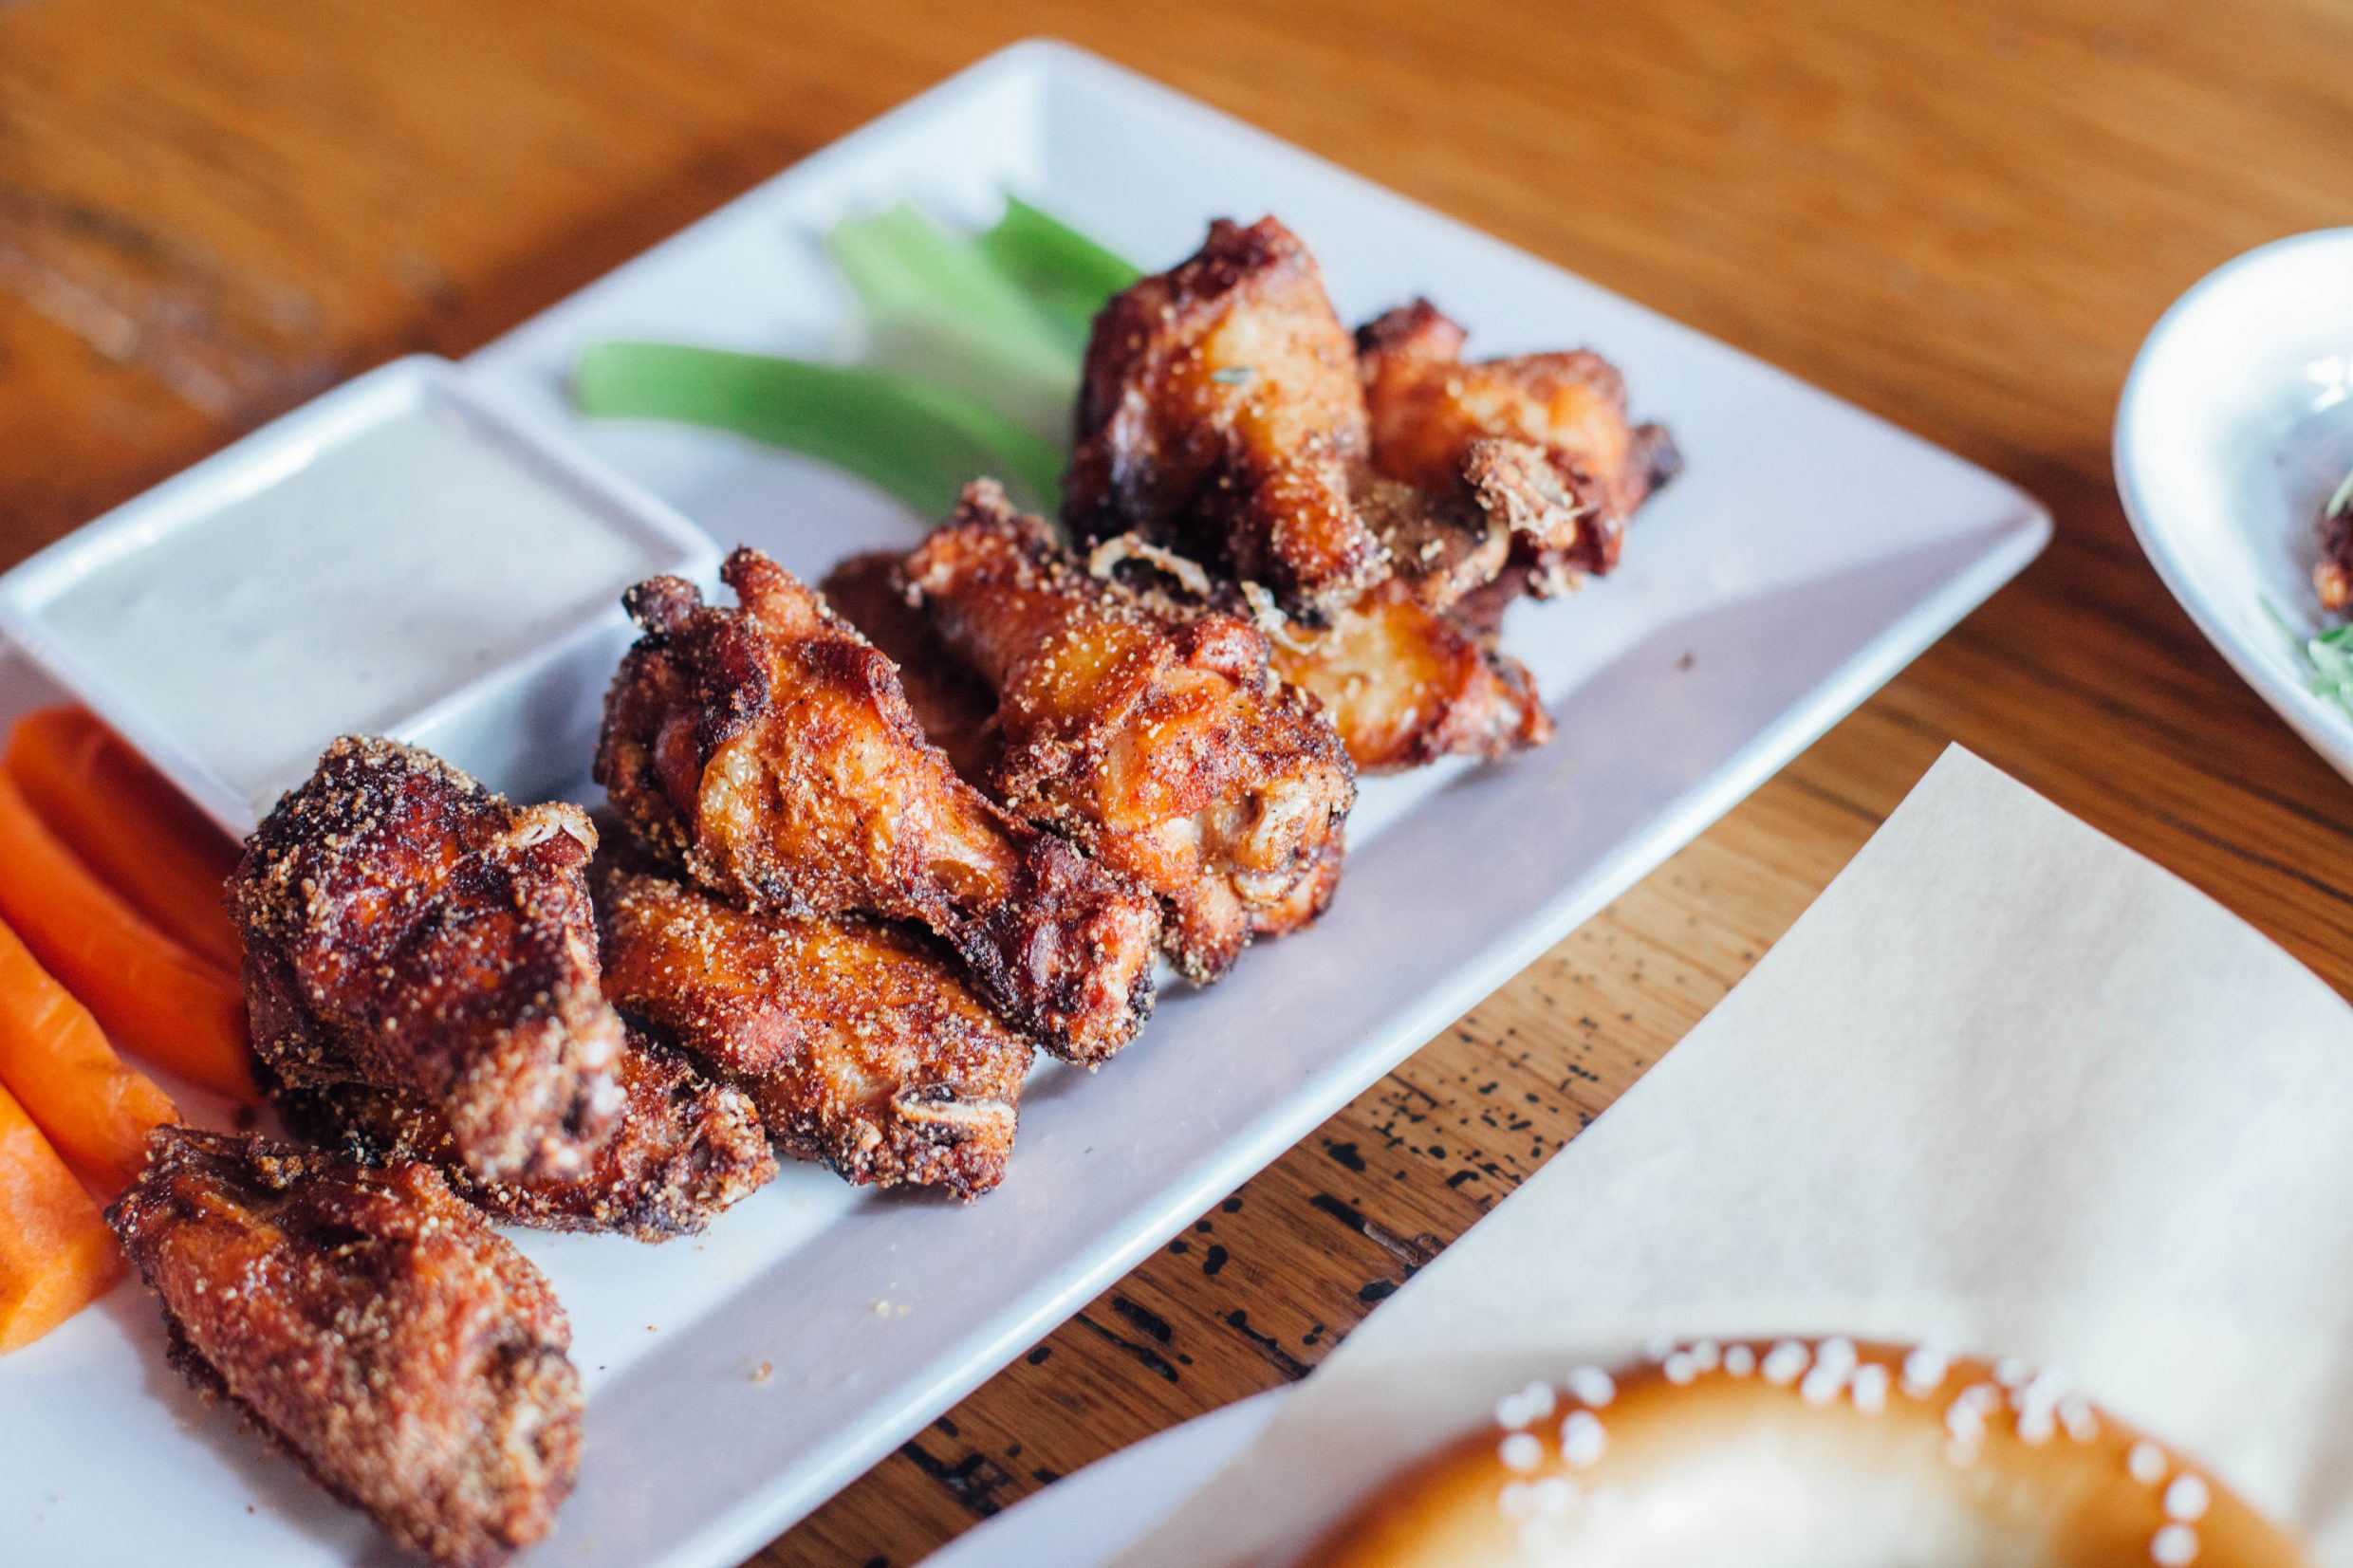 City Tap House - 10 Spice Wings | A weekend in Washington, D.C. | Travel and Food Guide